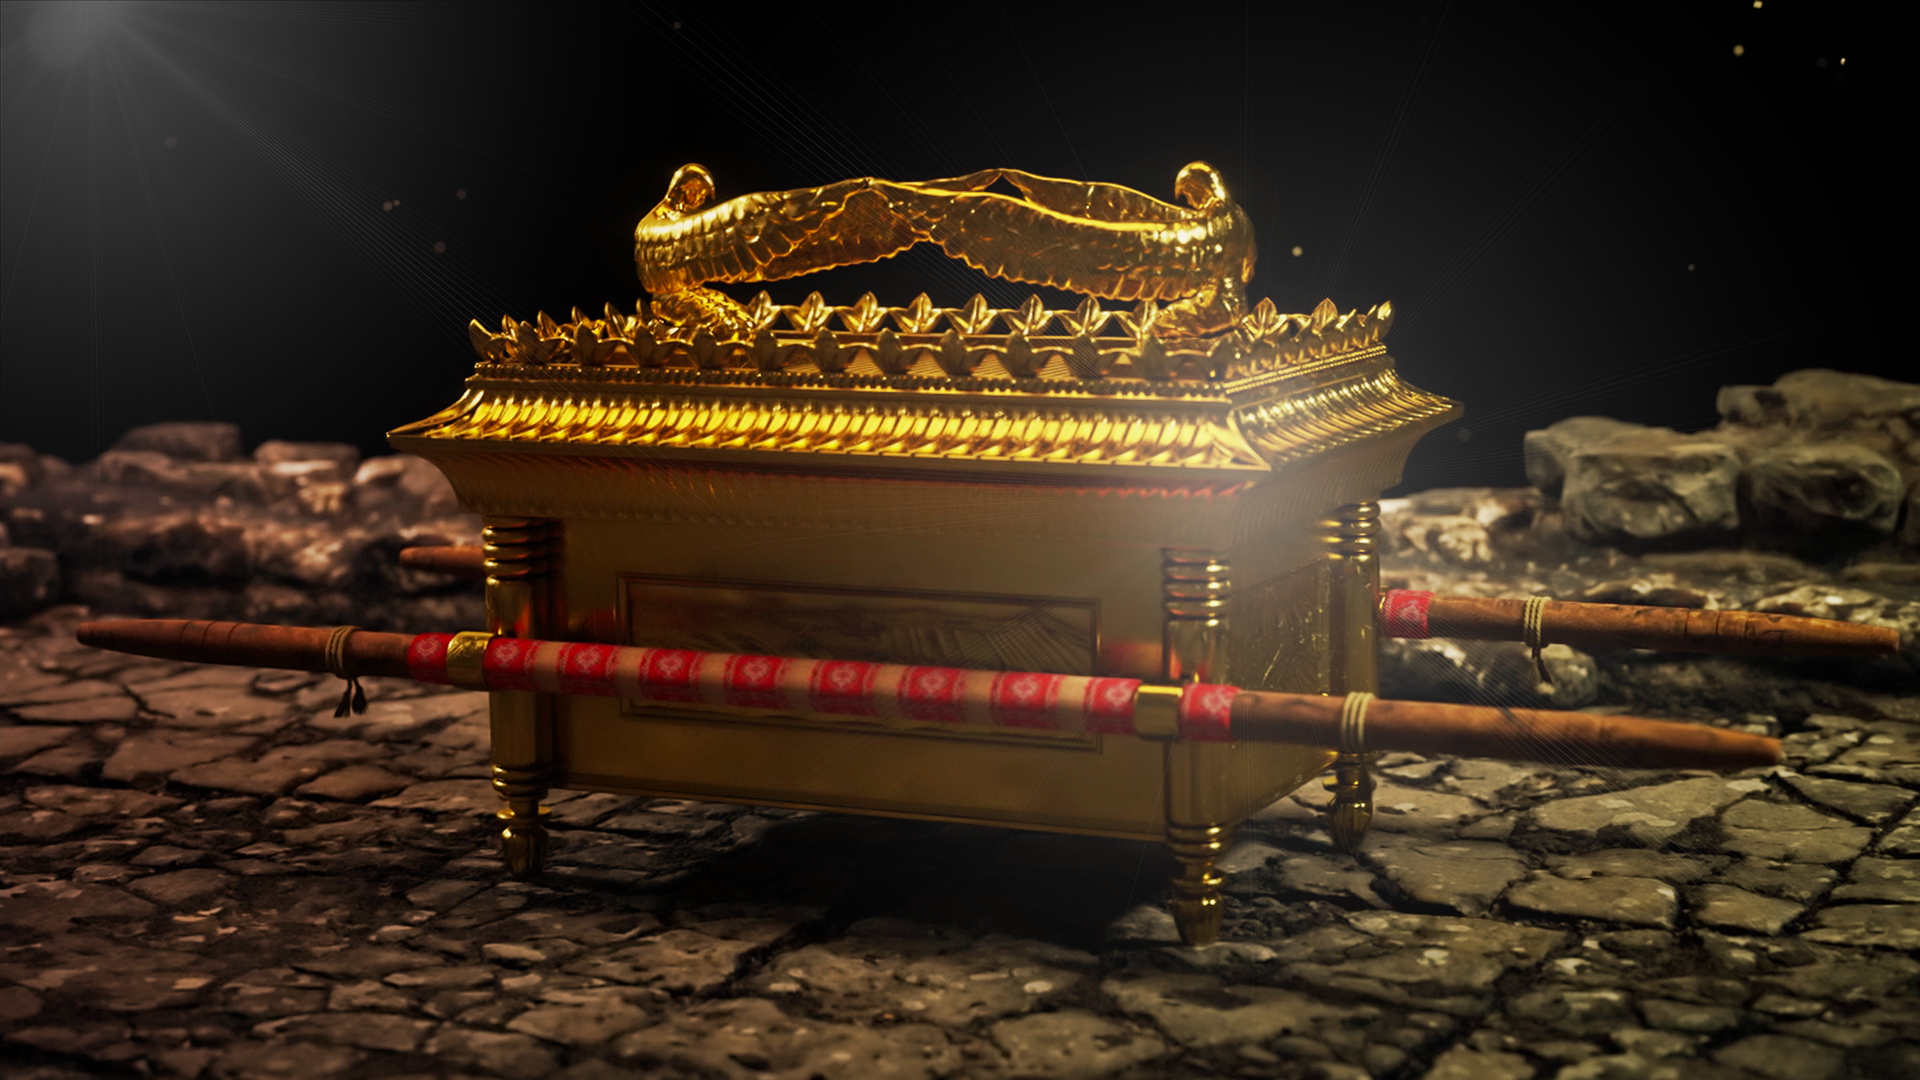 Solomon, Sheba, and the Ark of the Covenant